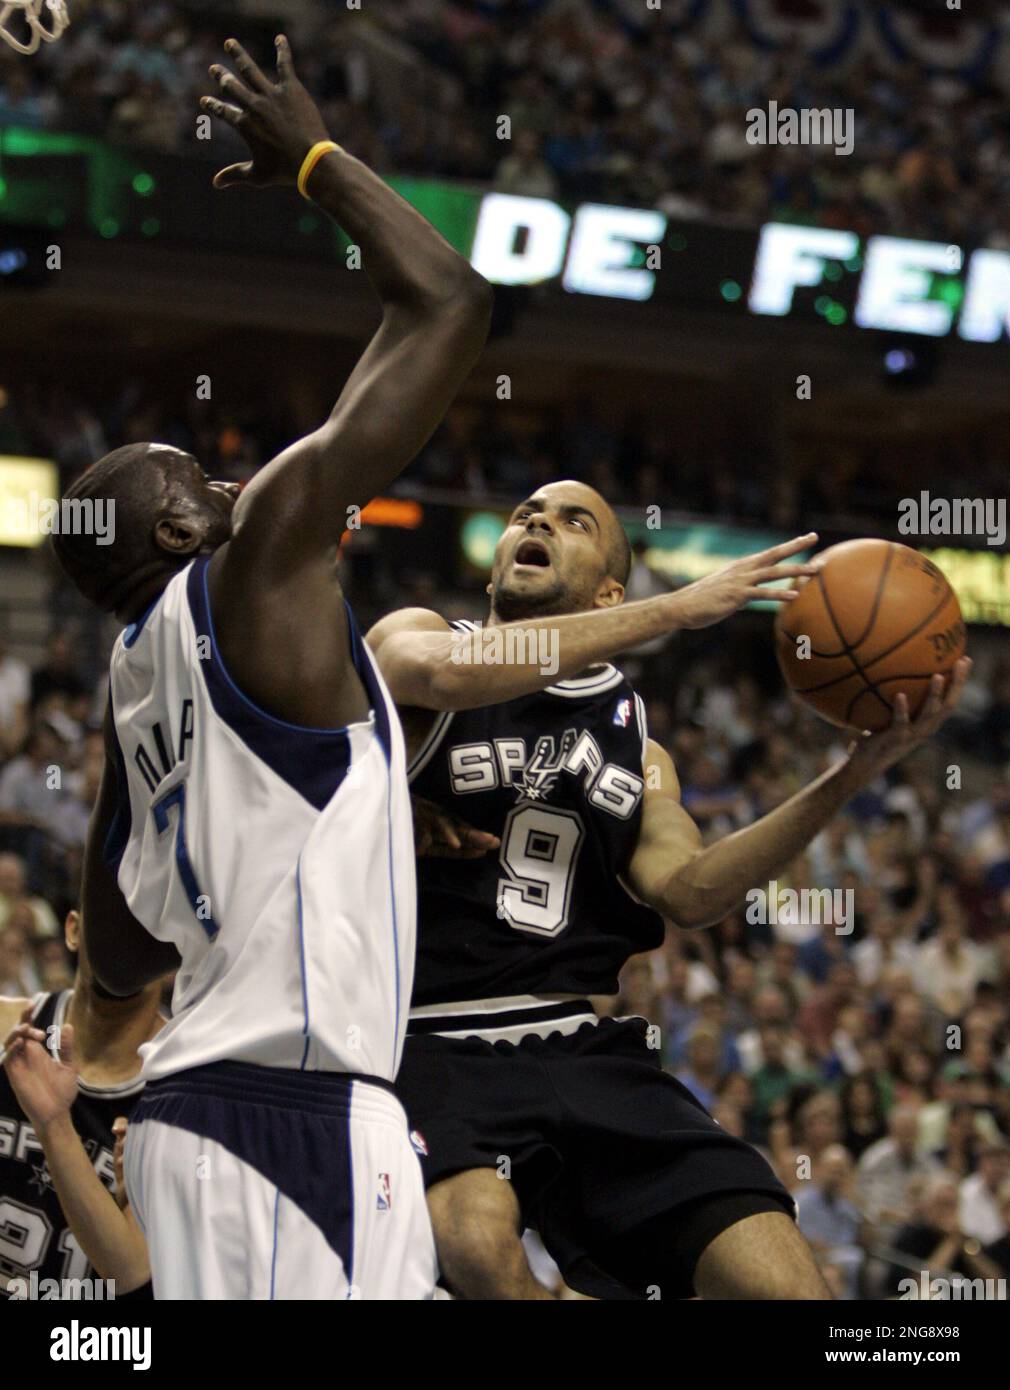 San Antonio Spurs Tony Parker (9) of France tries to shoot over Dallas Mavericks DeSagana Diop (7) in the first quarter in Game 6 of the NBA Western Conference semifinal basketball game